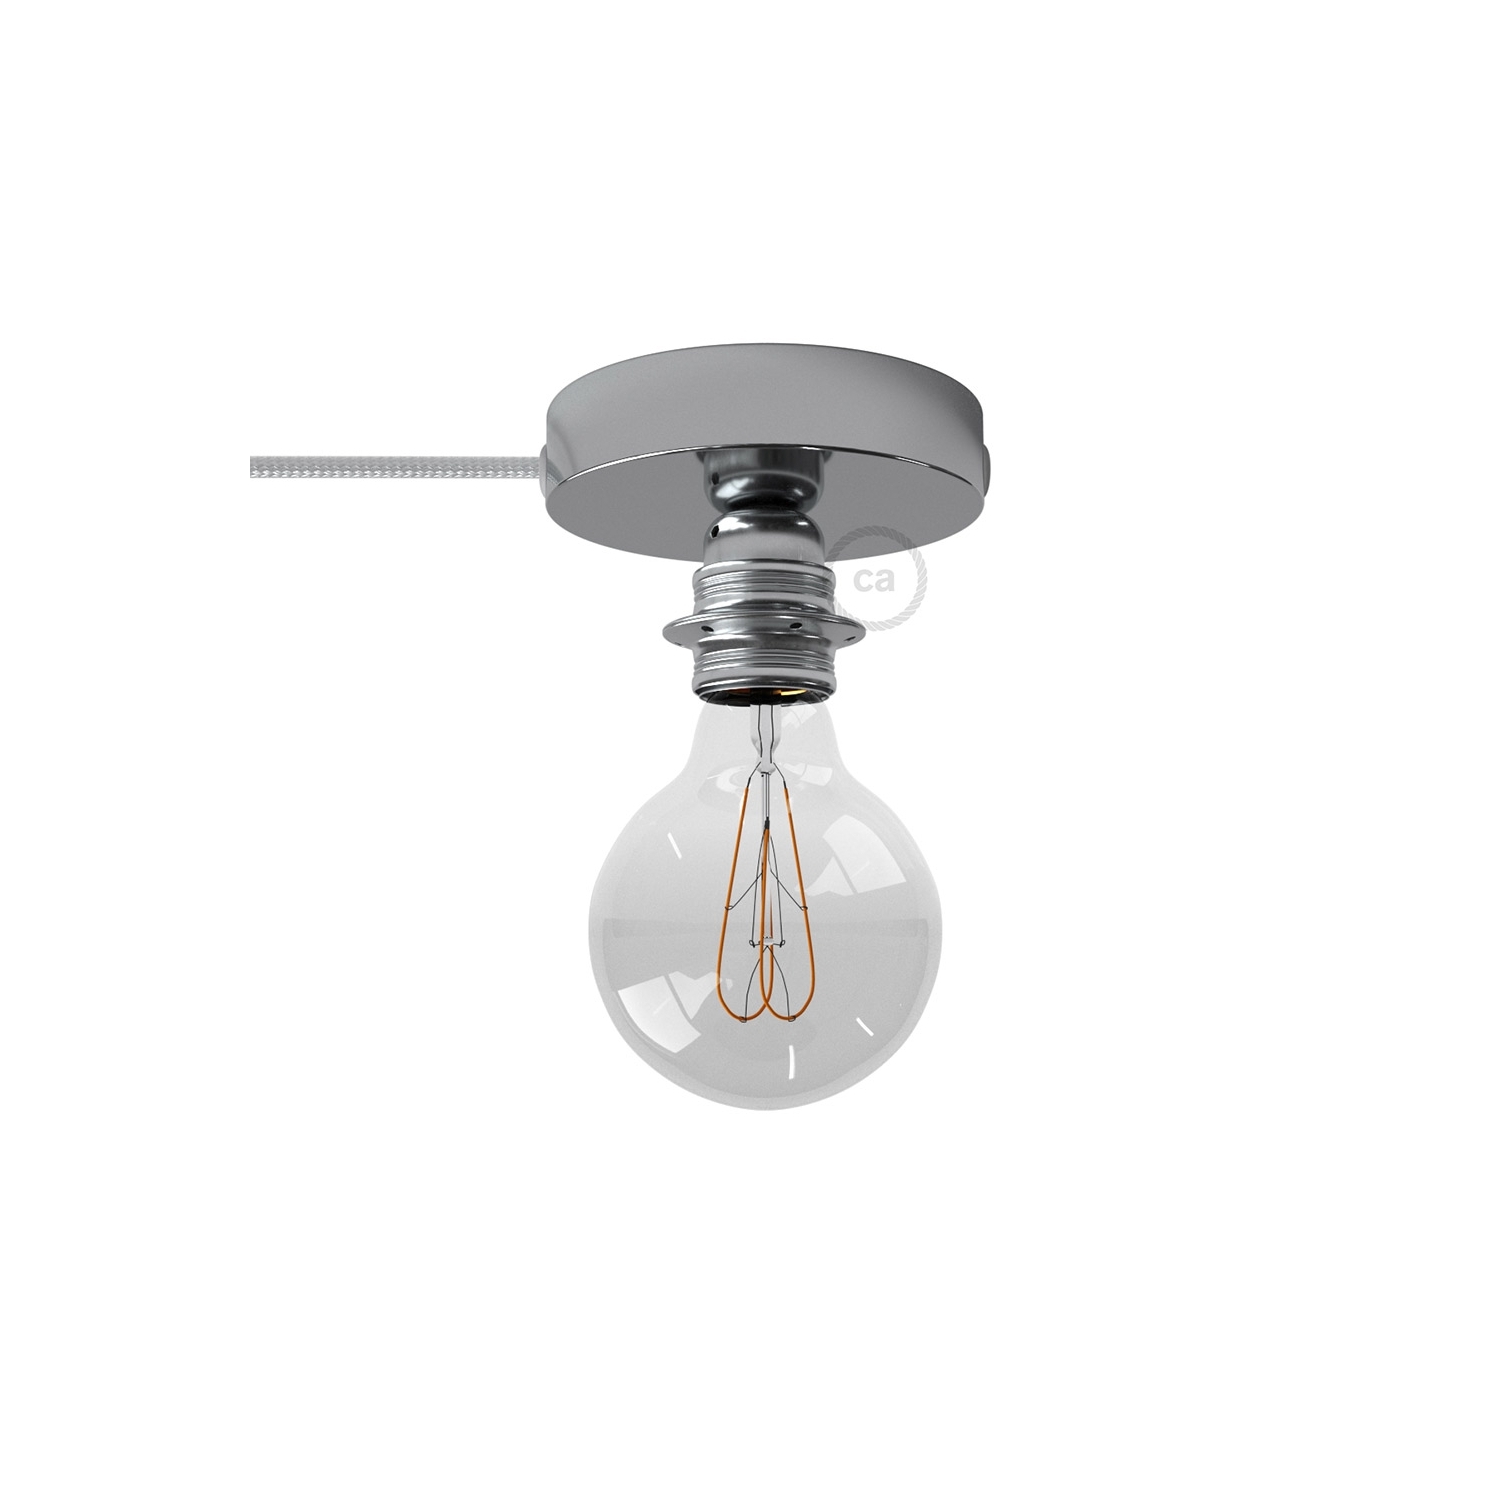 Spostaluce, the chromed metal light source with E26 threaded socket, fabric cable and side holes